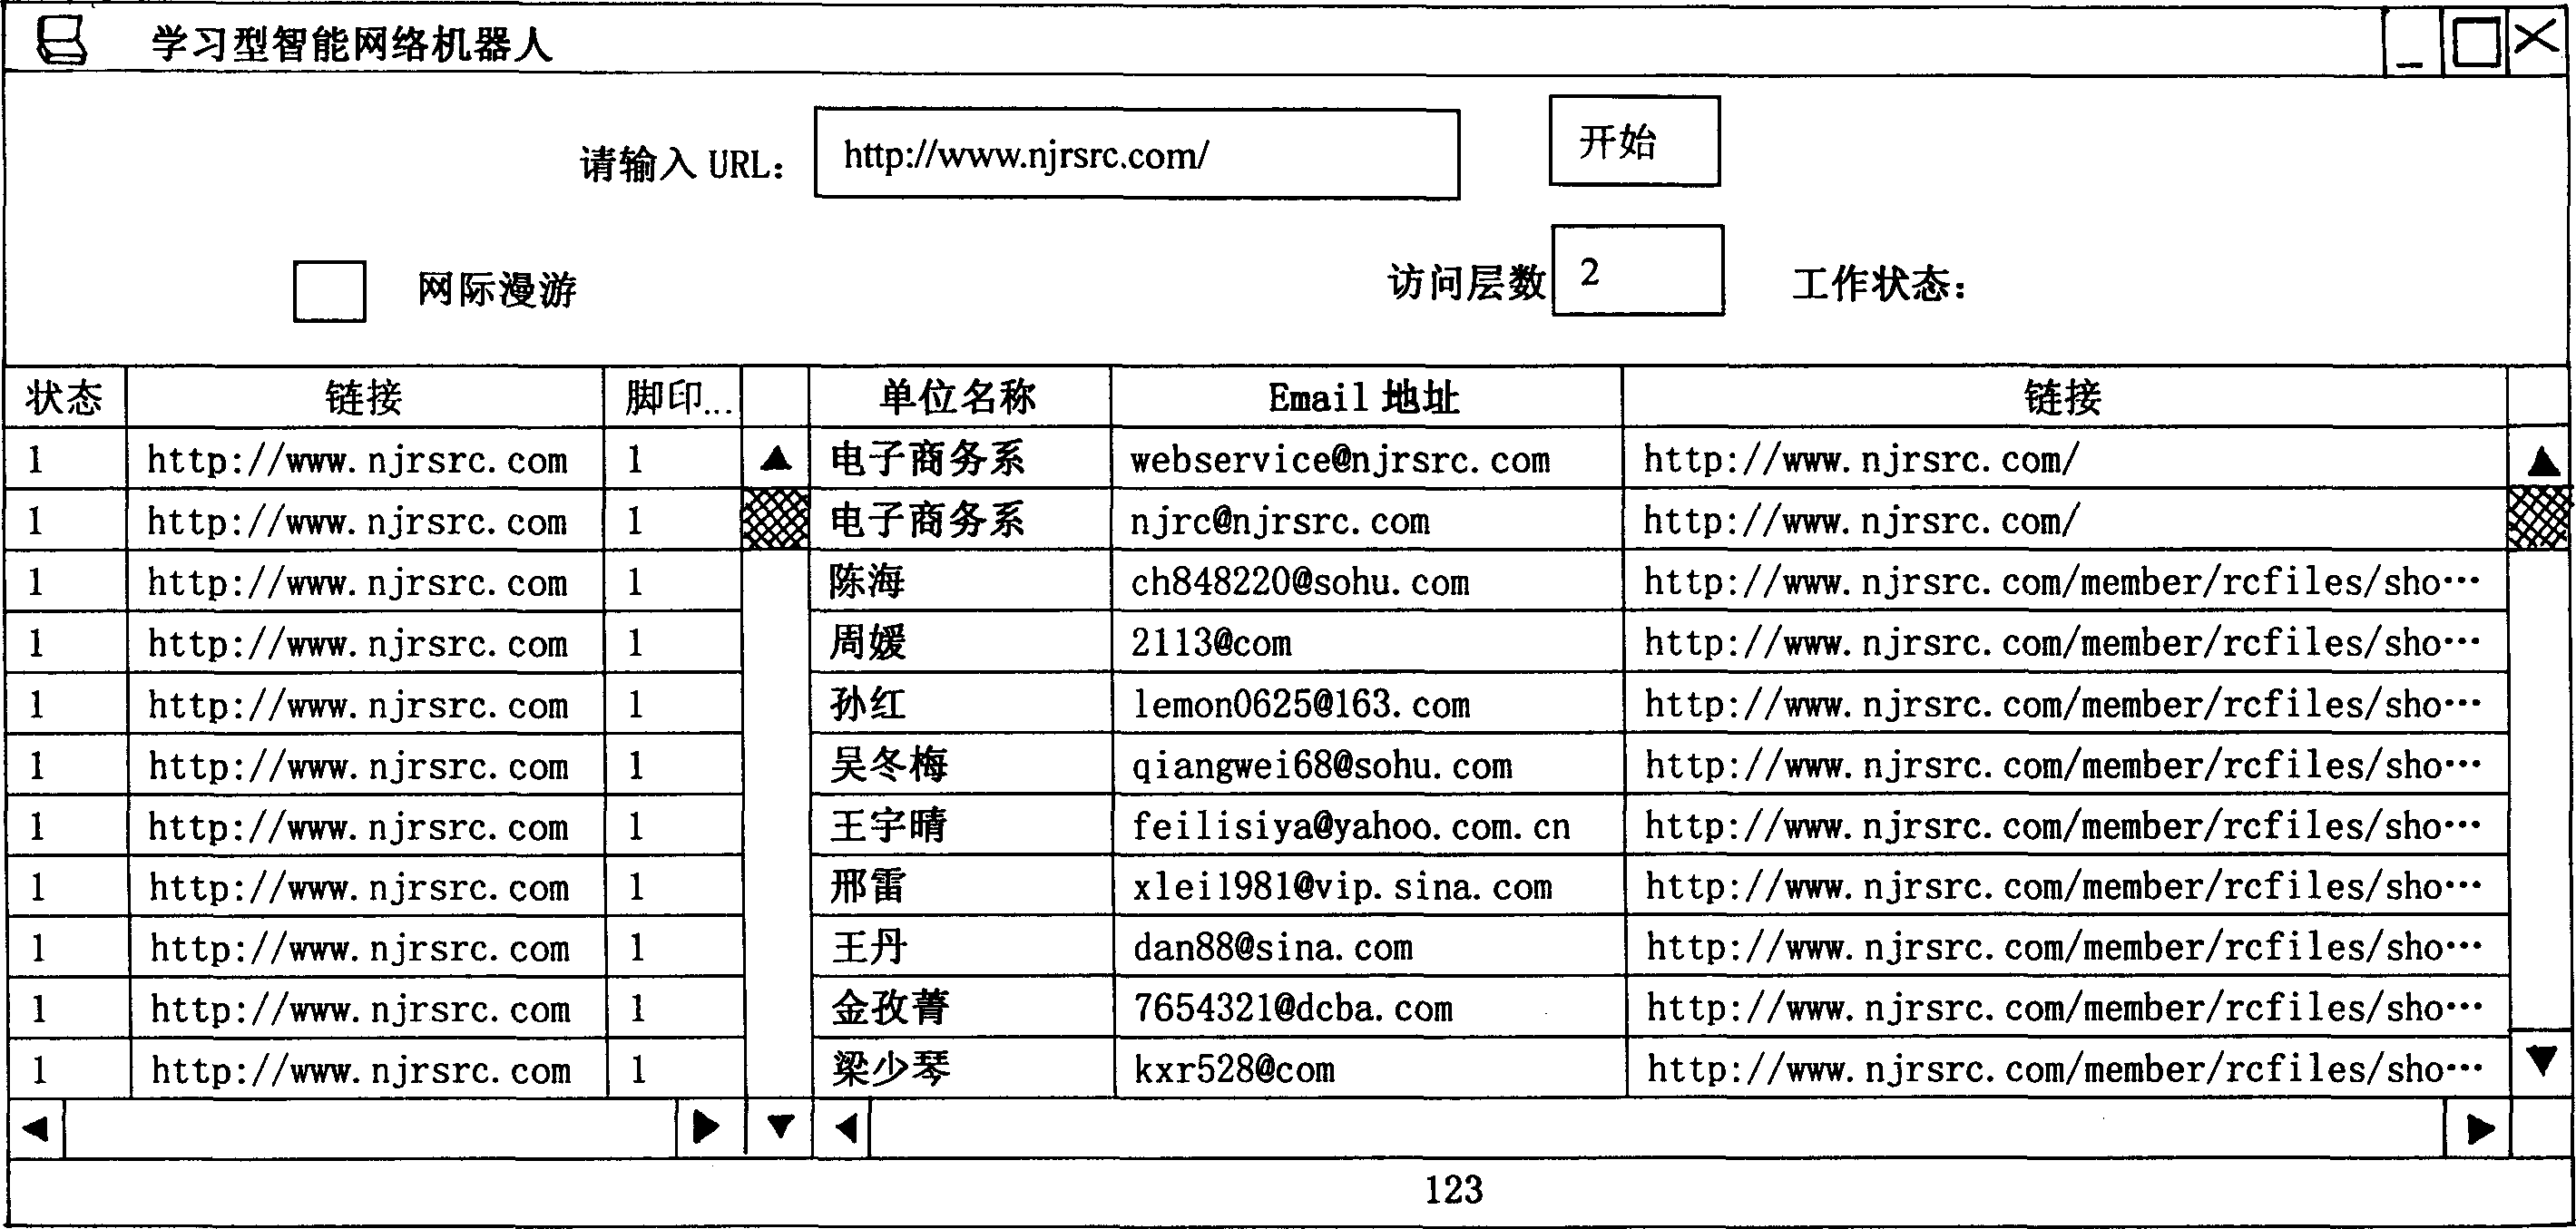 Fine-grained webpage information acquisition method